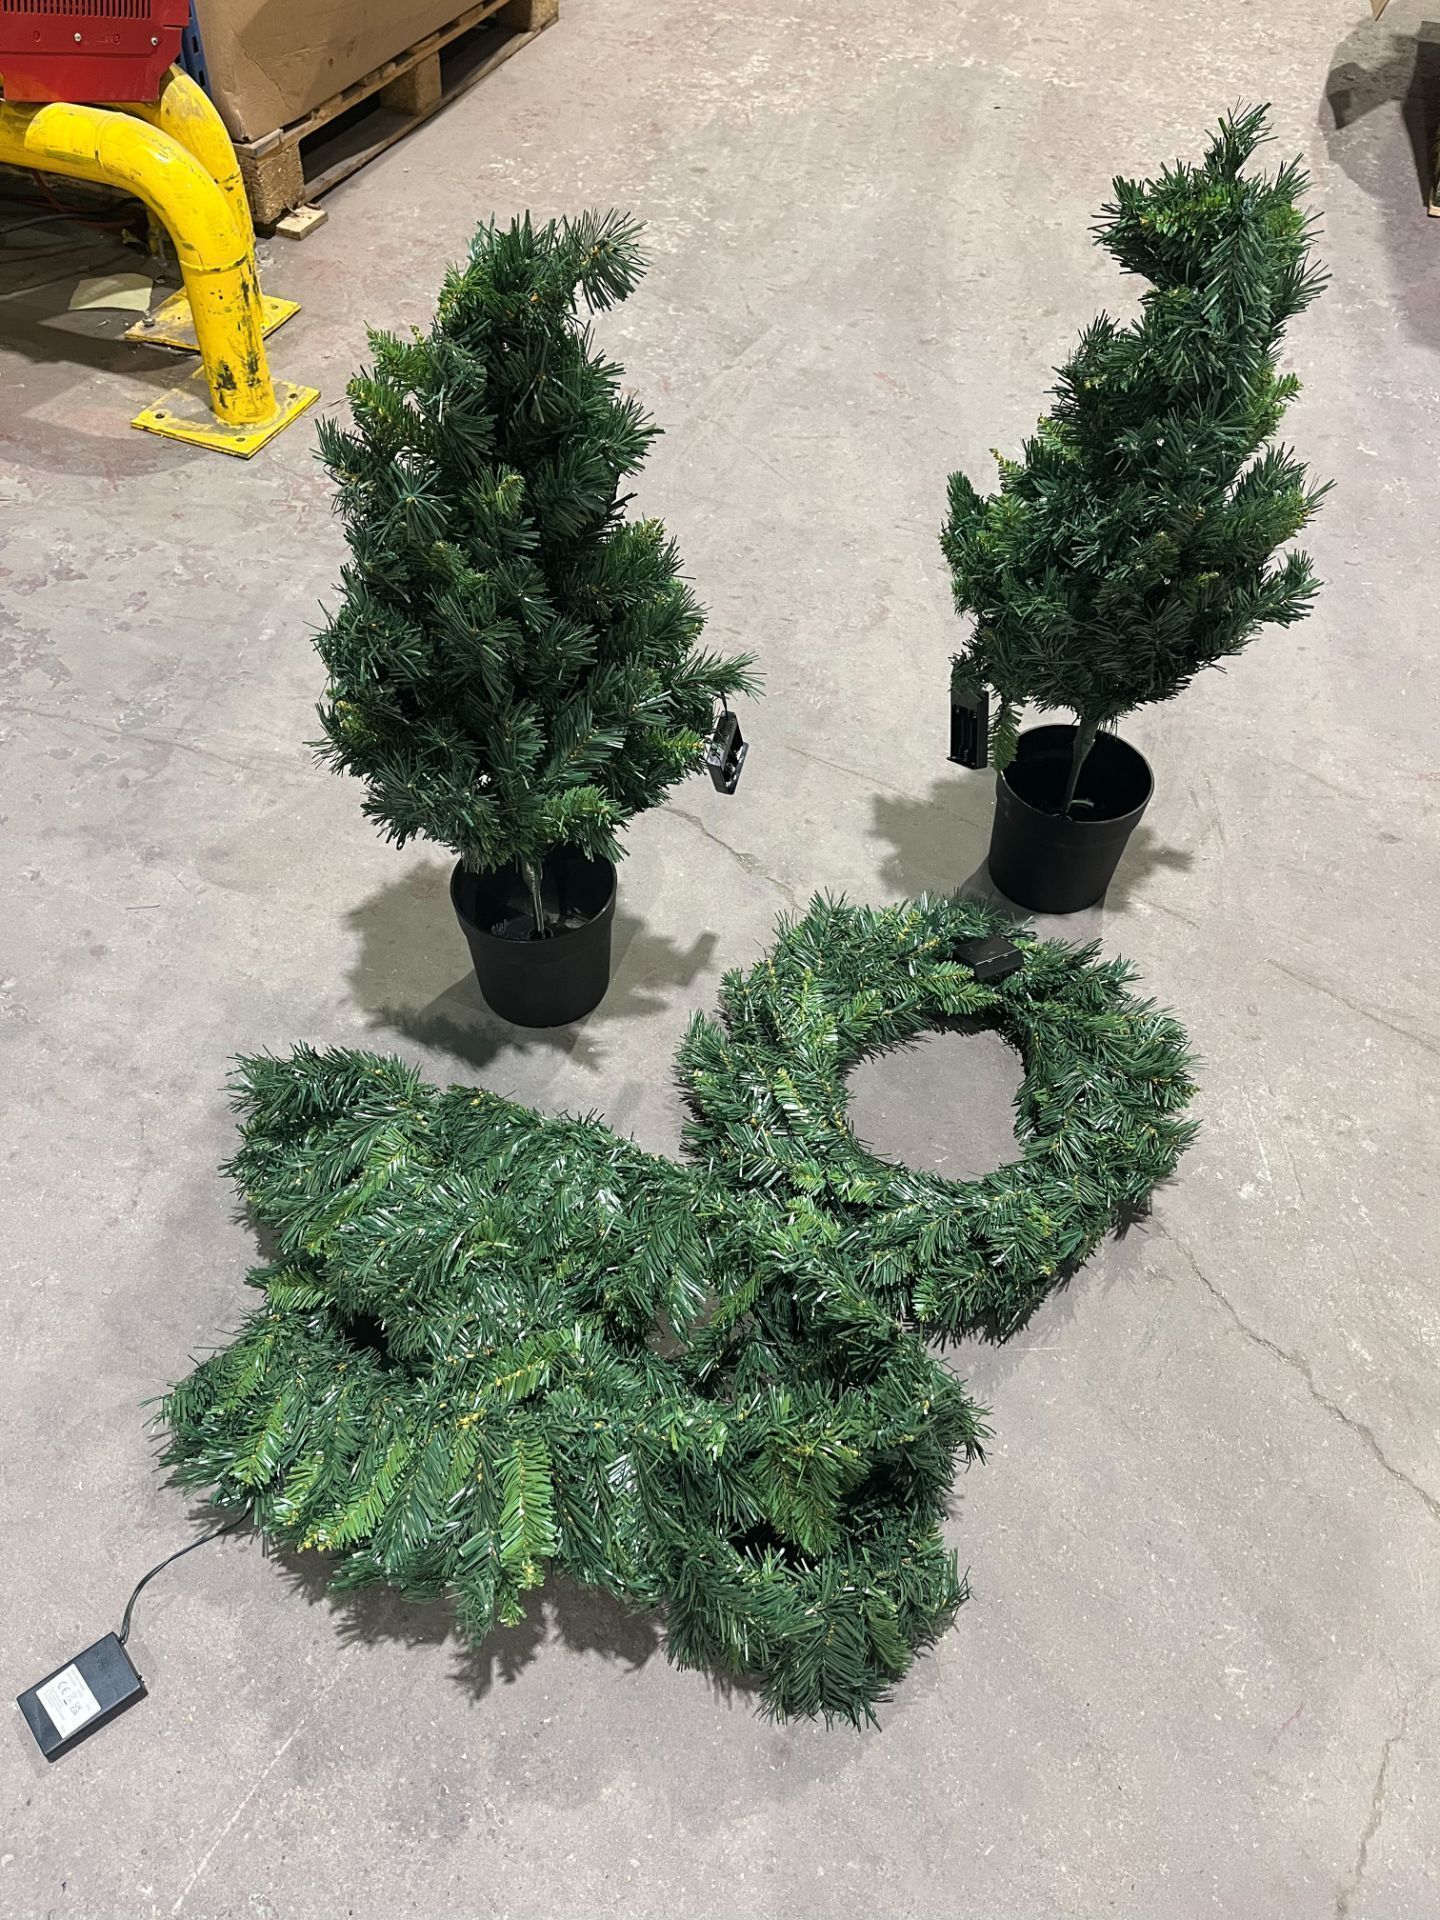 TRADE LOT 5 X BRAND NEW CHRISTMAS DOOR LED LIGHTS SETS INCLDUNG 2 X POTTED TREES AND 2 BRANCH - Image 2 of 2